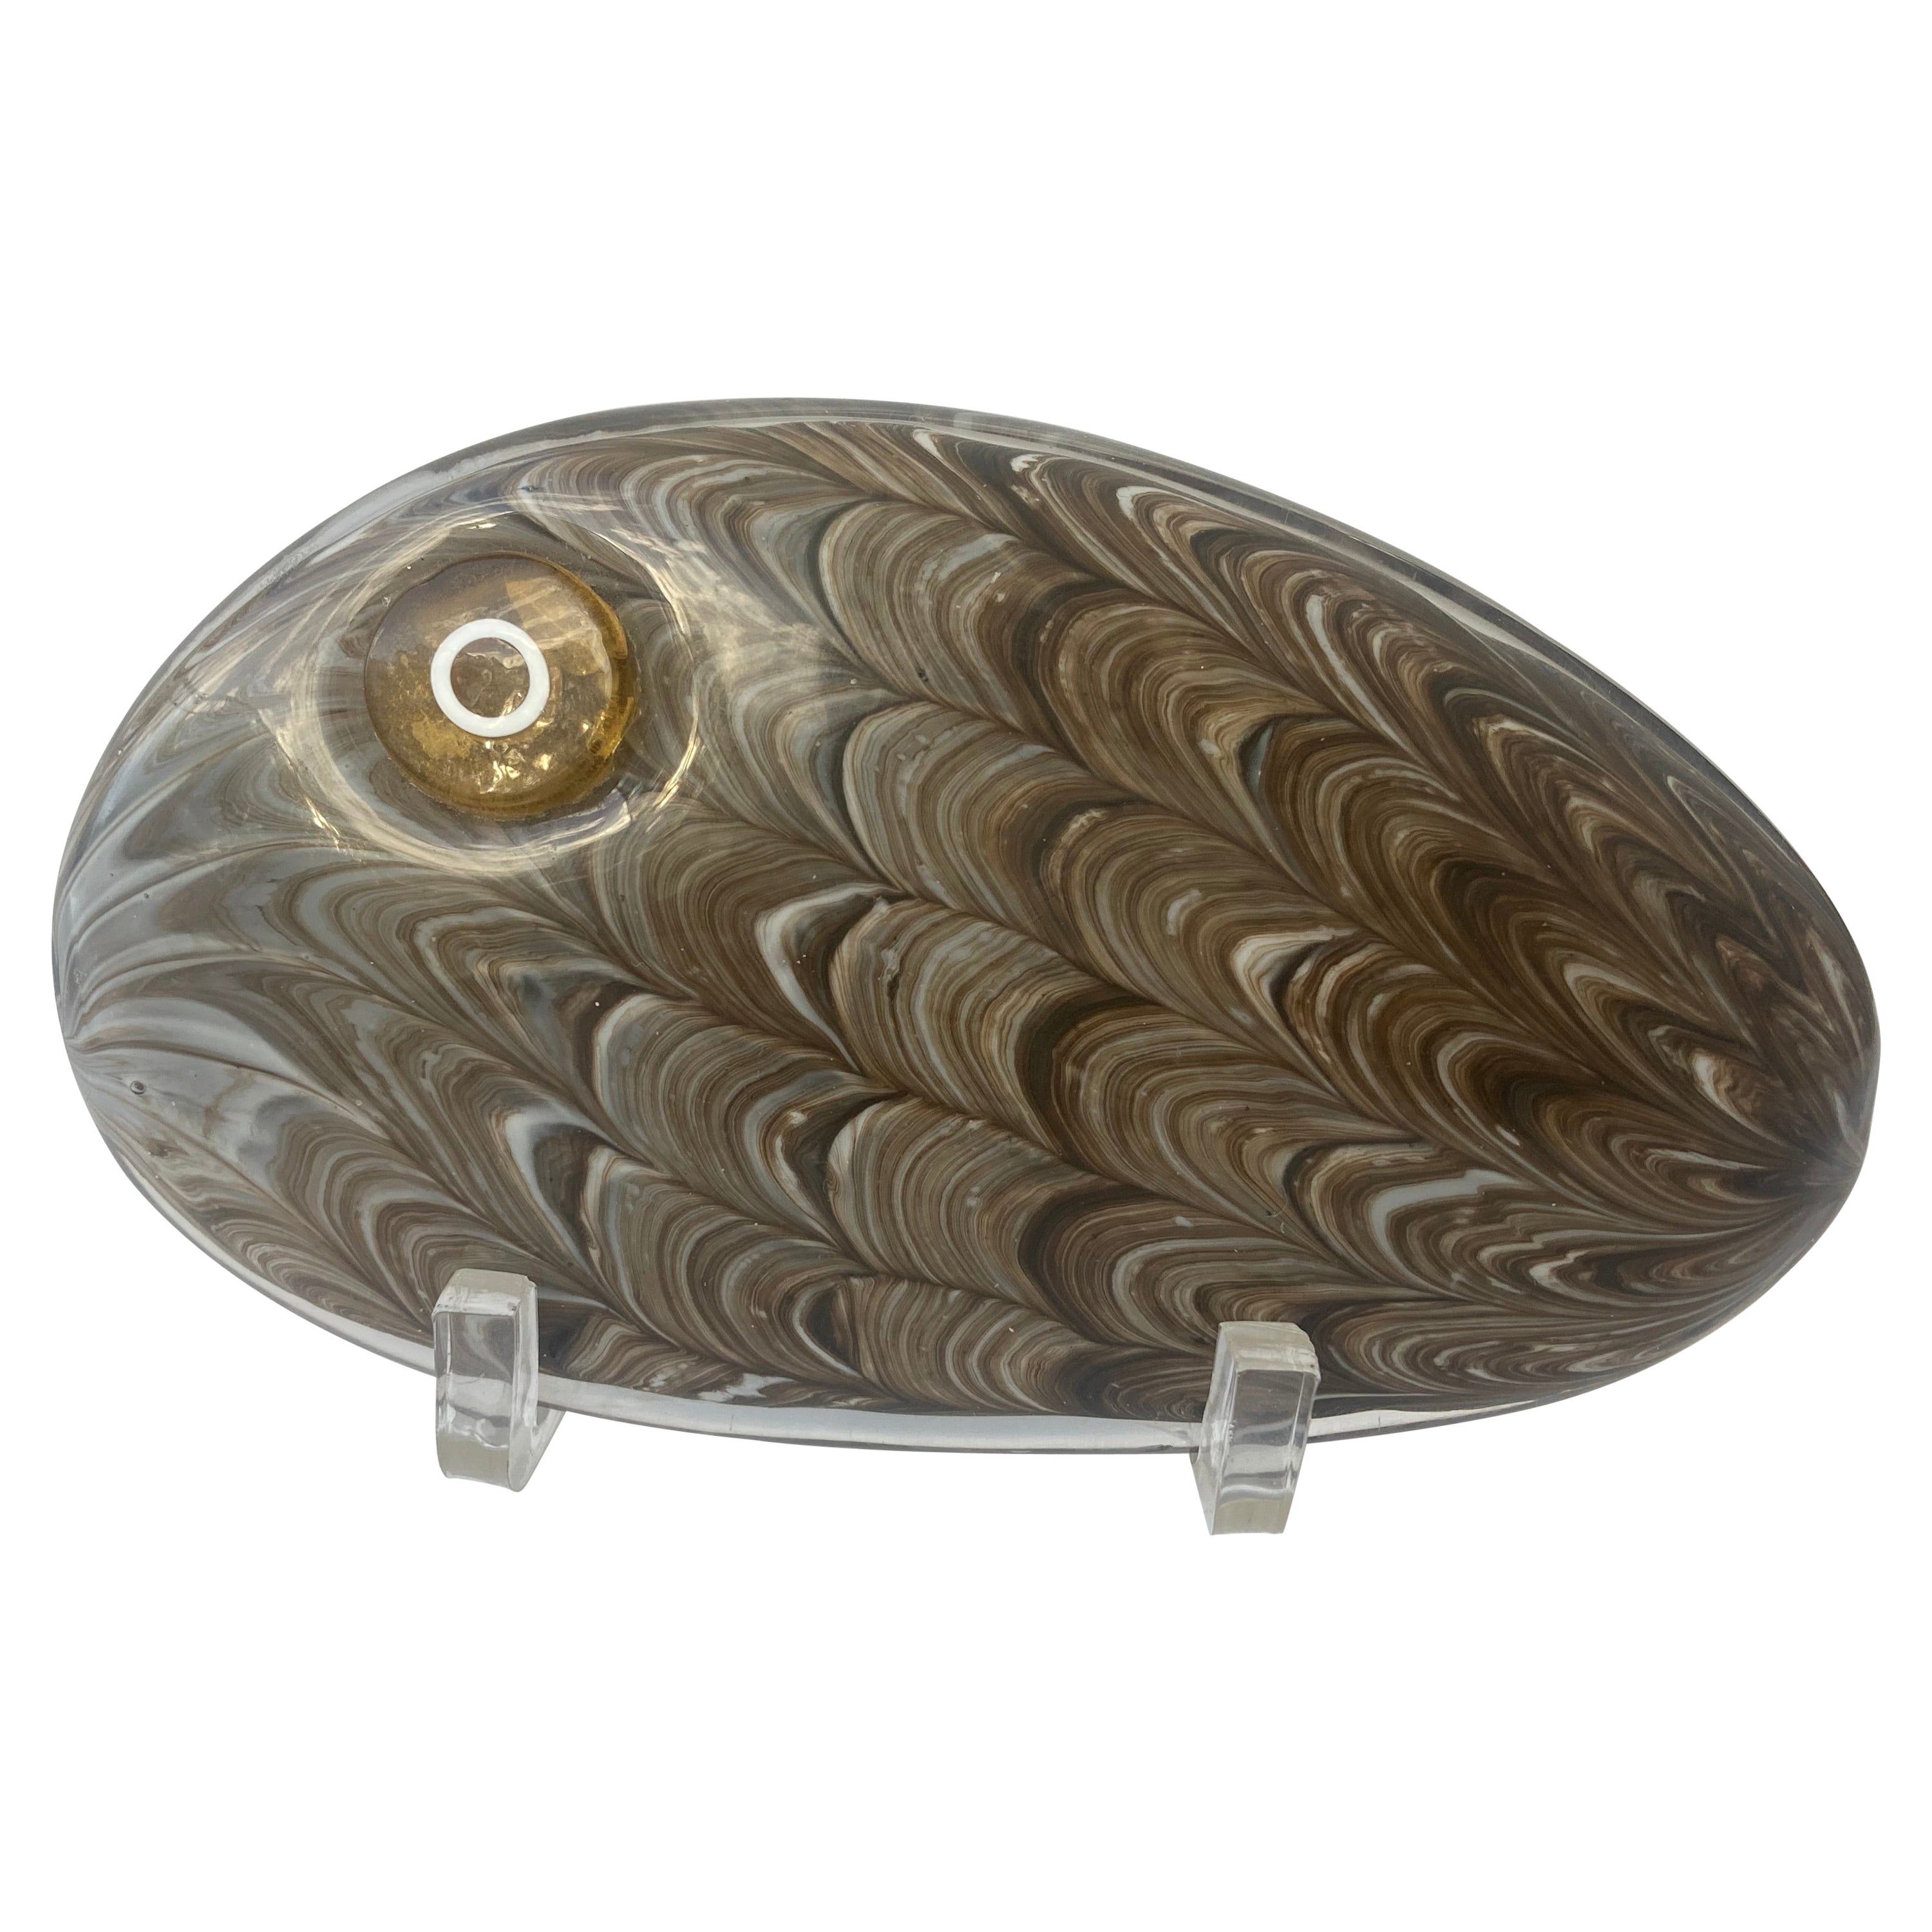 Barovier & Toso Murano Glass "Neolitico Fish" Sculpture/Paperweight For Sale